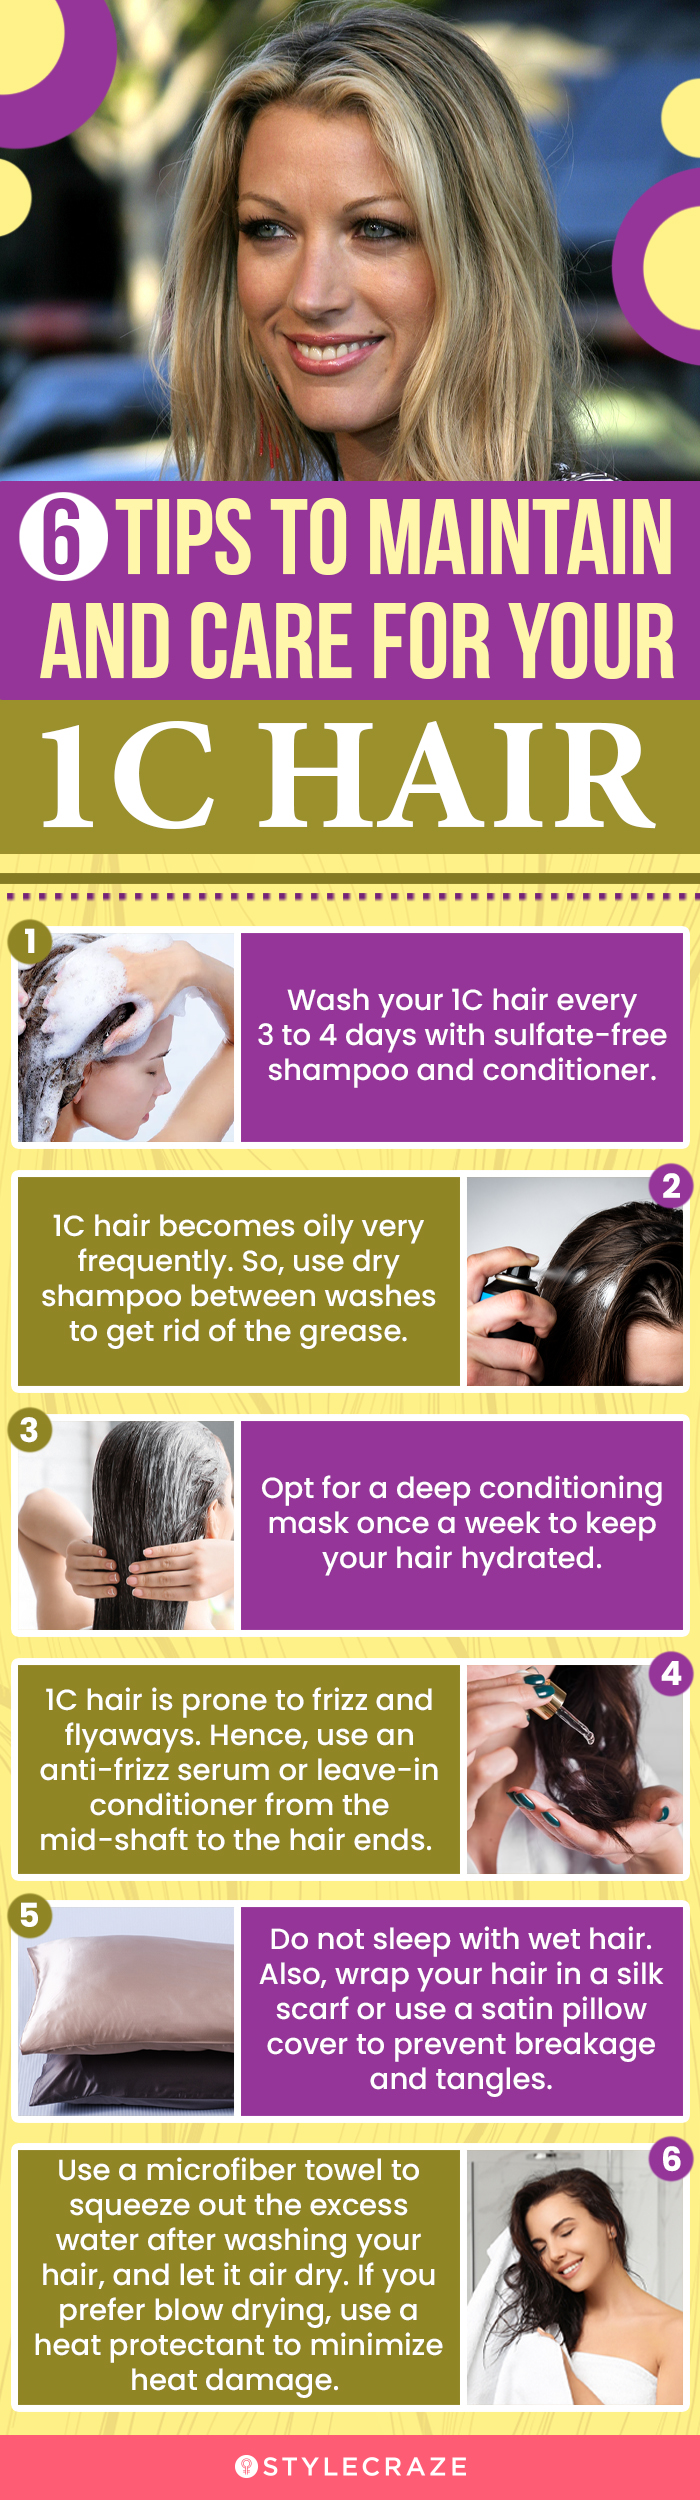 how to maintain and care for your 1c hair 6 top tips (infographic)